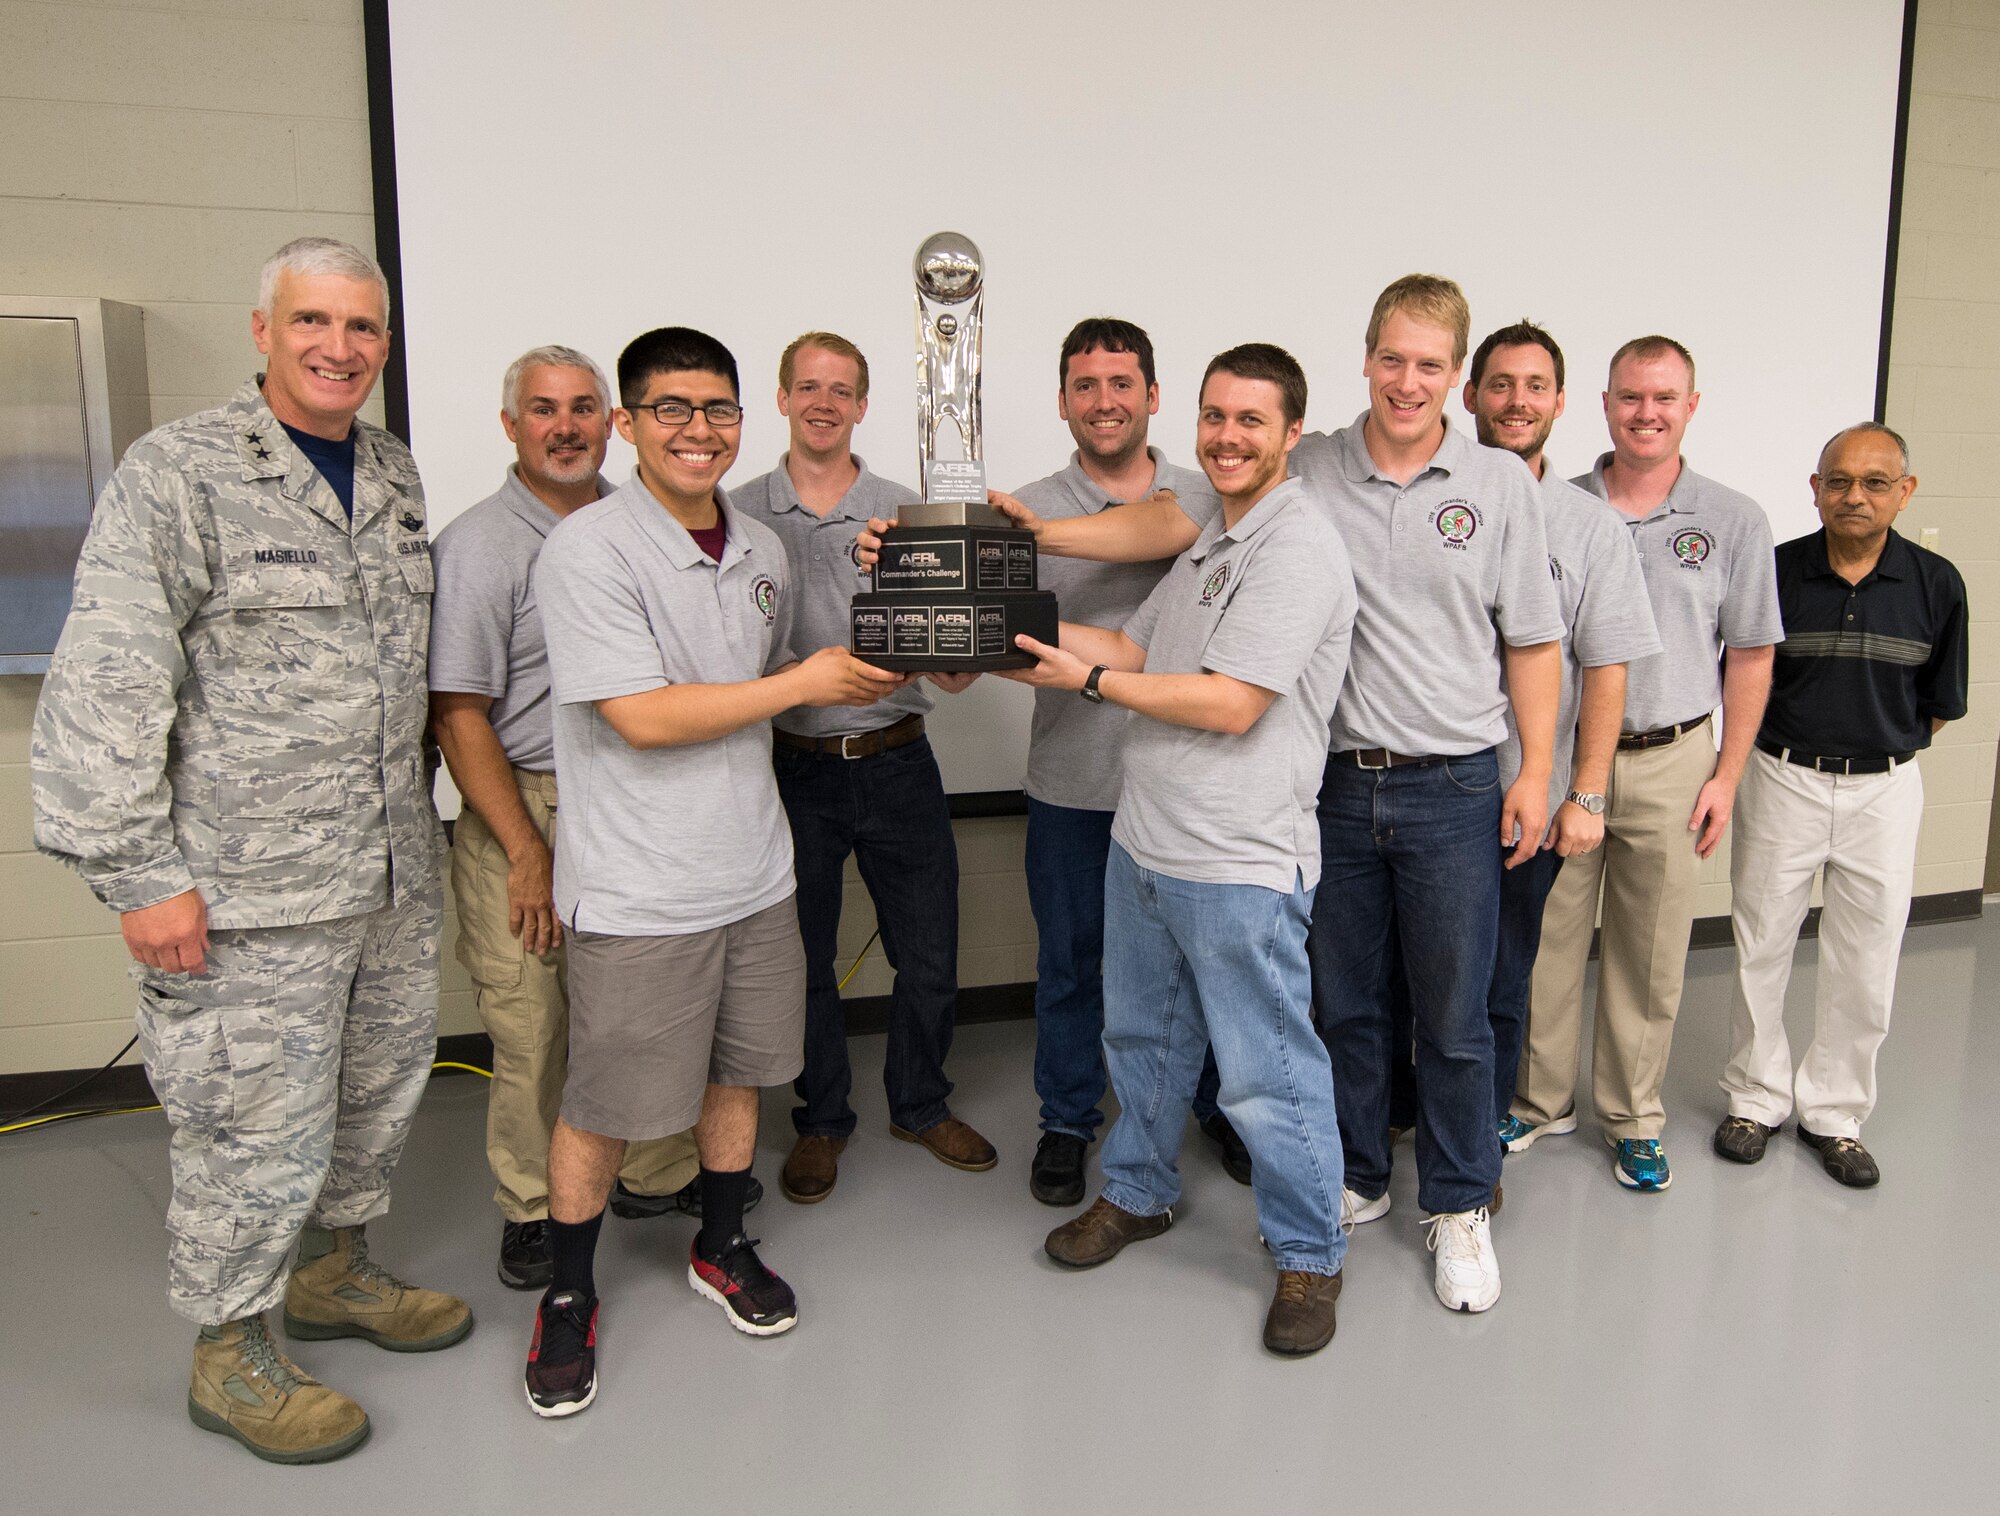 Maj. Gen. Thomas J. Masiello, Air Force Research Laboratory commander, presents the team from Wright-Patterson Air Force Base, Ohio, the 2015 AFRL Commanders Challenge Trophy after they were named the winners, June 19, at the Muscatatuck Urban Training Center, Butlerville,, Ind. The challenge involved four teams from Wright-Patterson Air Force Base, Ohio, Robbins AFB,Ga., Hill AFB, Utah and Kirtland AFB, N.M., who were given the task to develop systems for detecting an active shooter. (U.S. Air Force photo by Wesley Farnsworth)